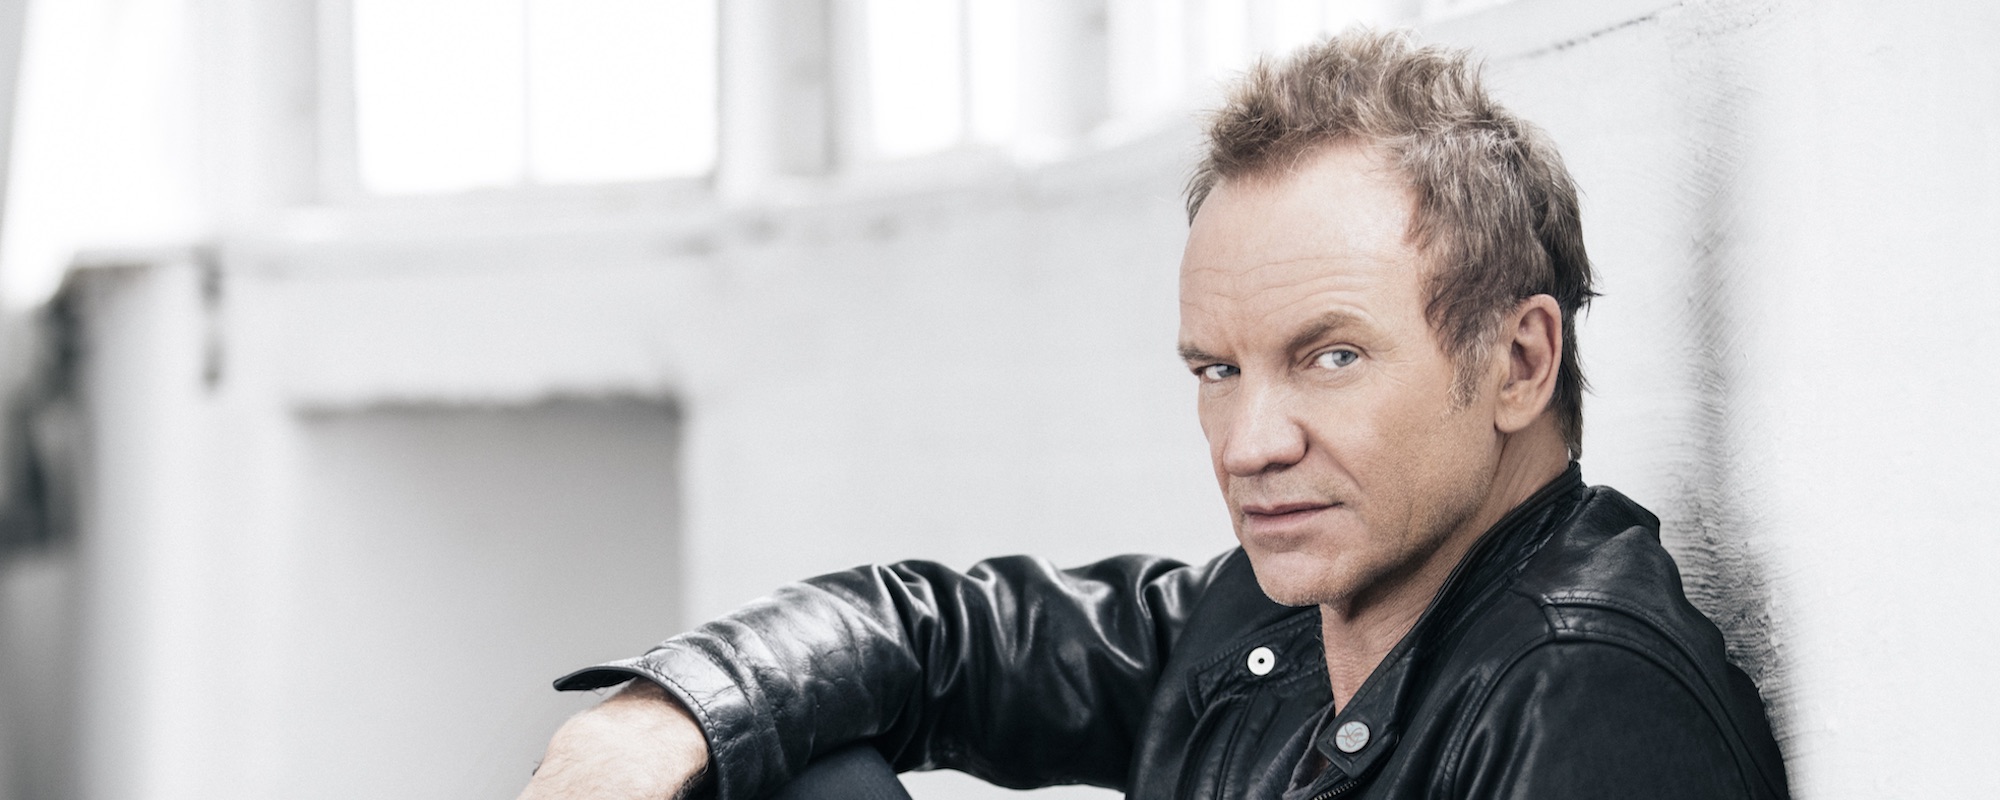 Sting Says He’s a Heavy Metal Singer with ”a Little More Melody“